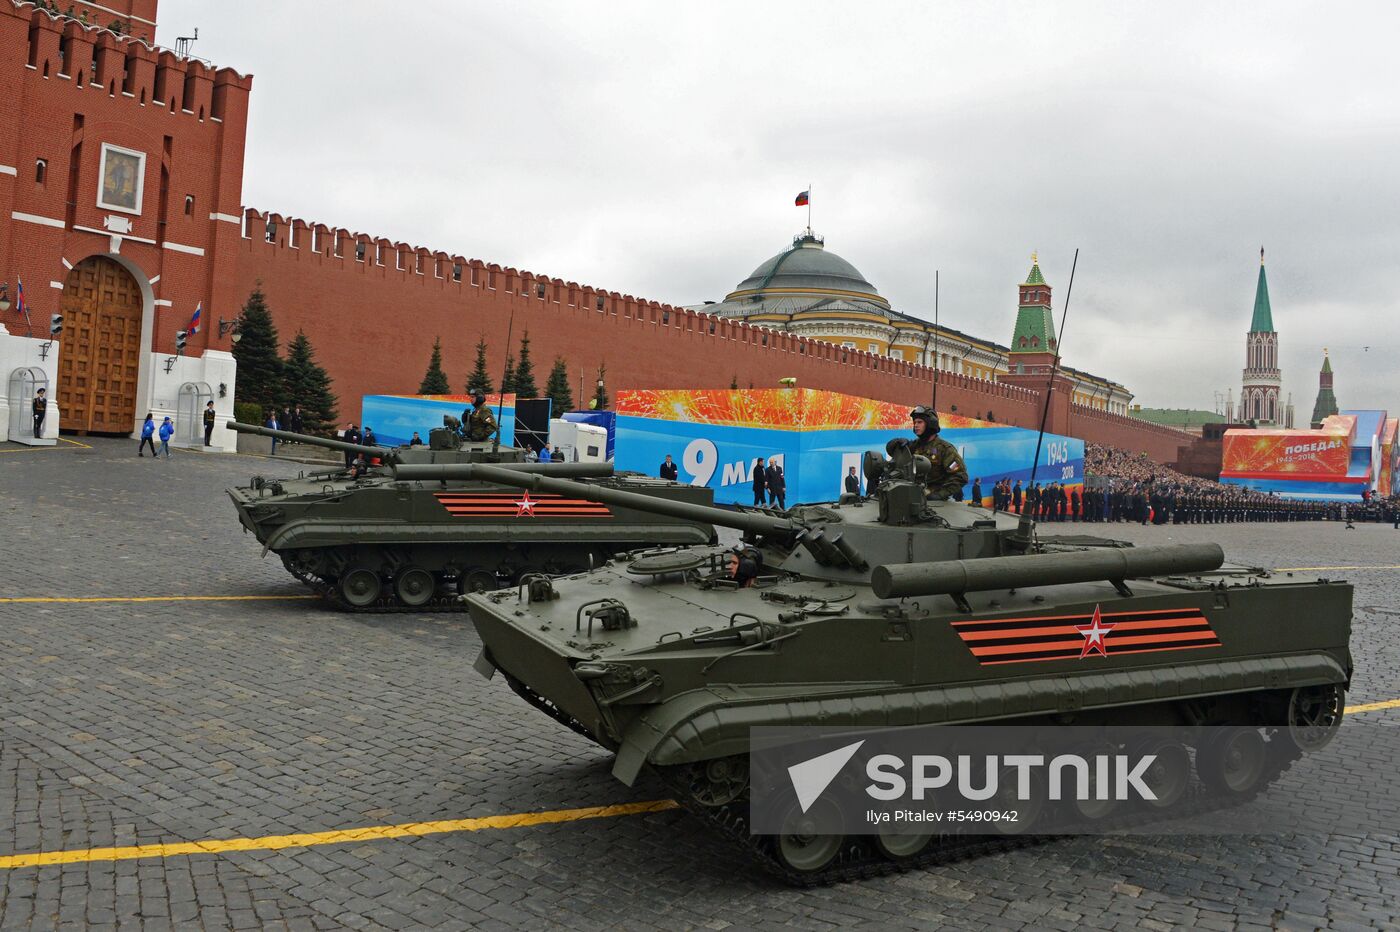 Final rehearsal of Victory Day Parade on Red Square